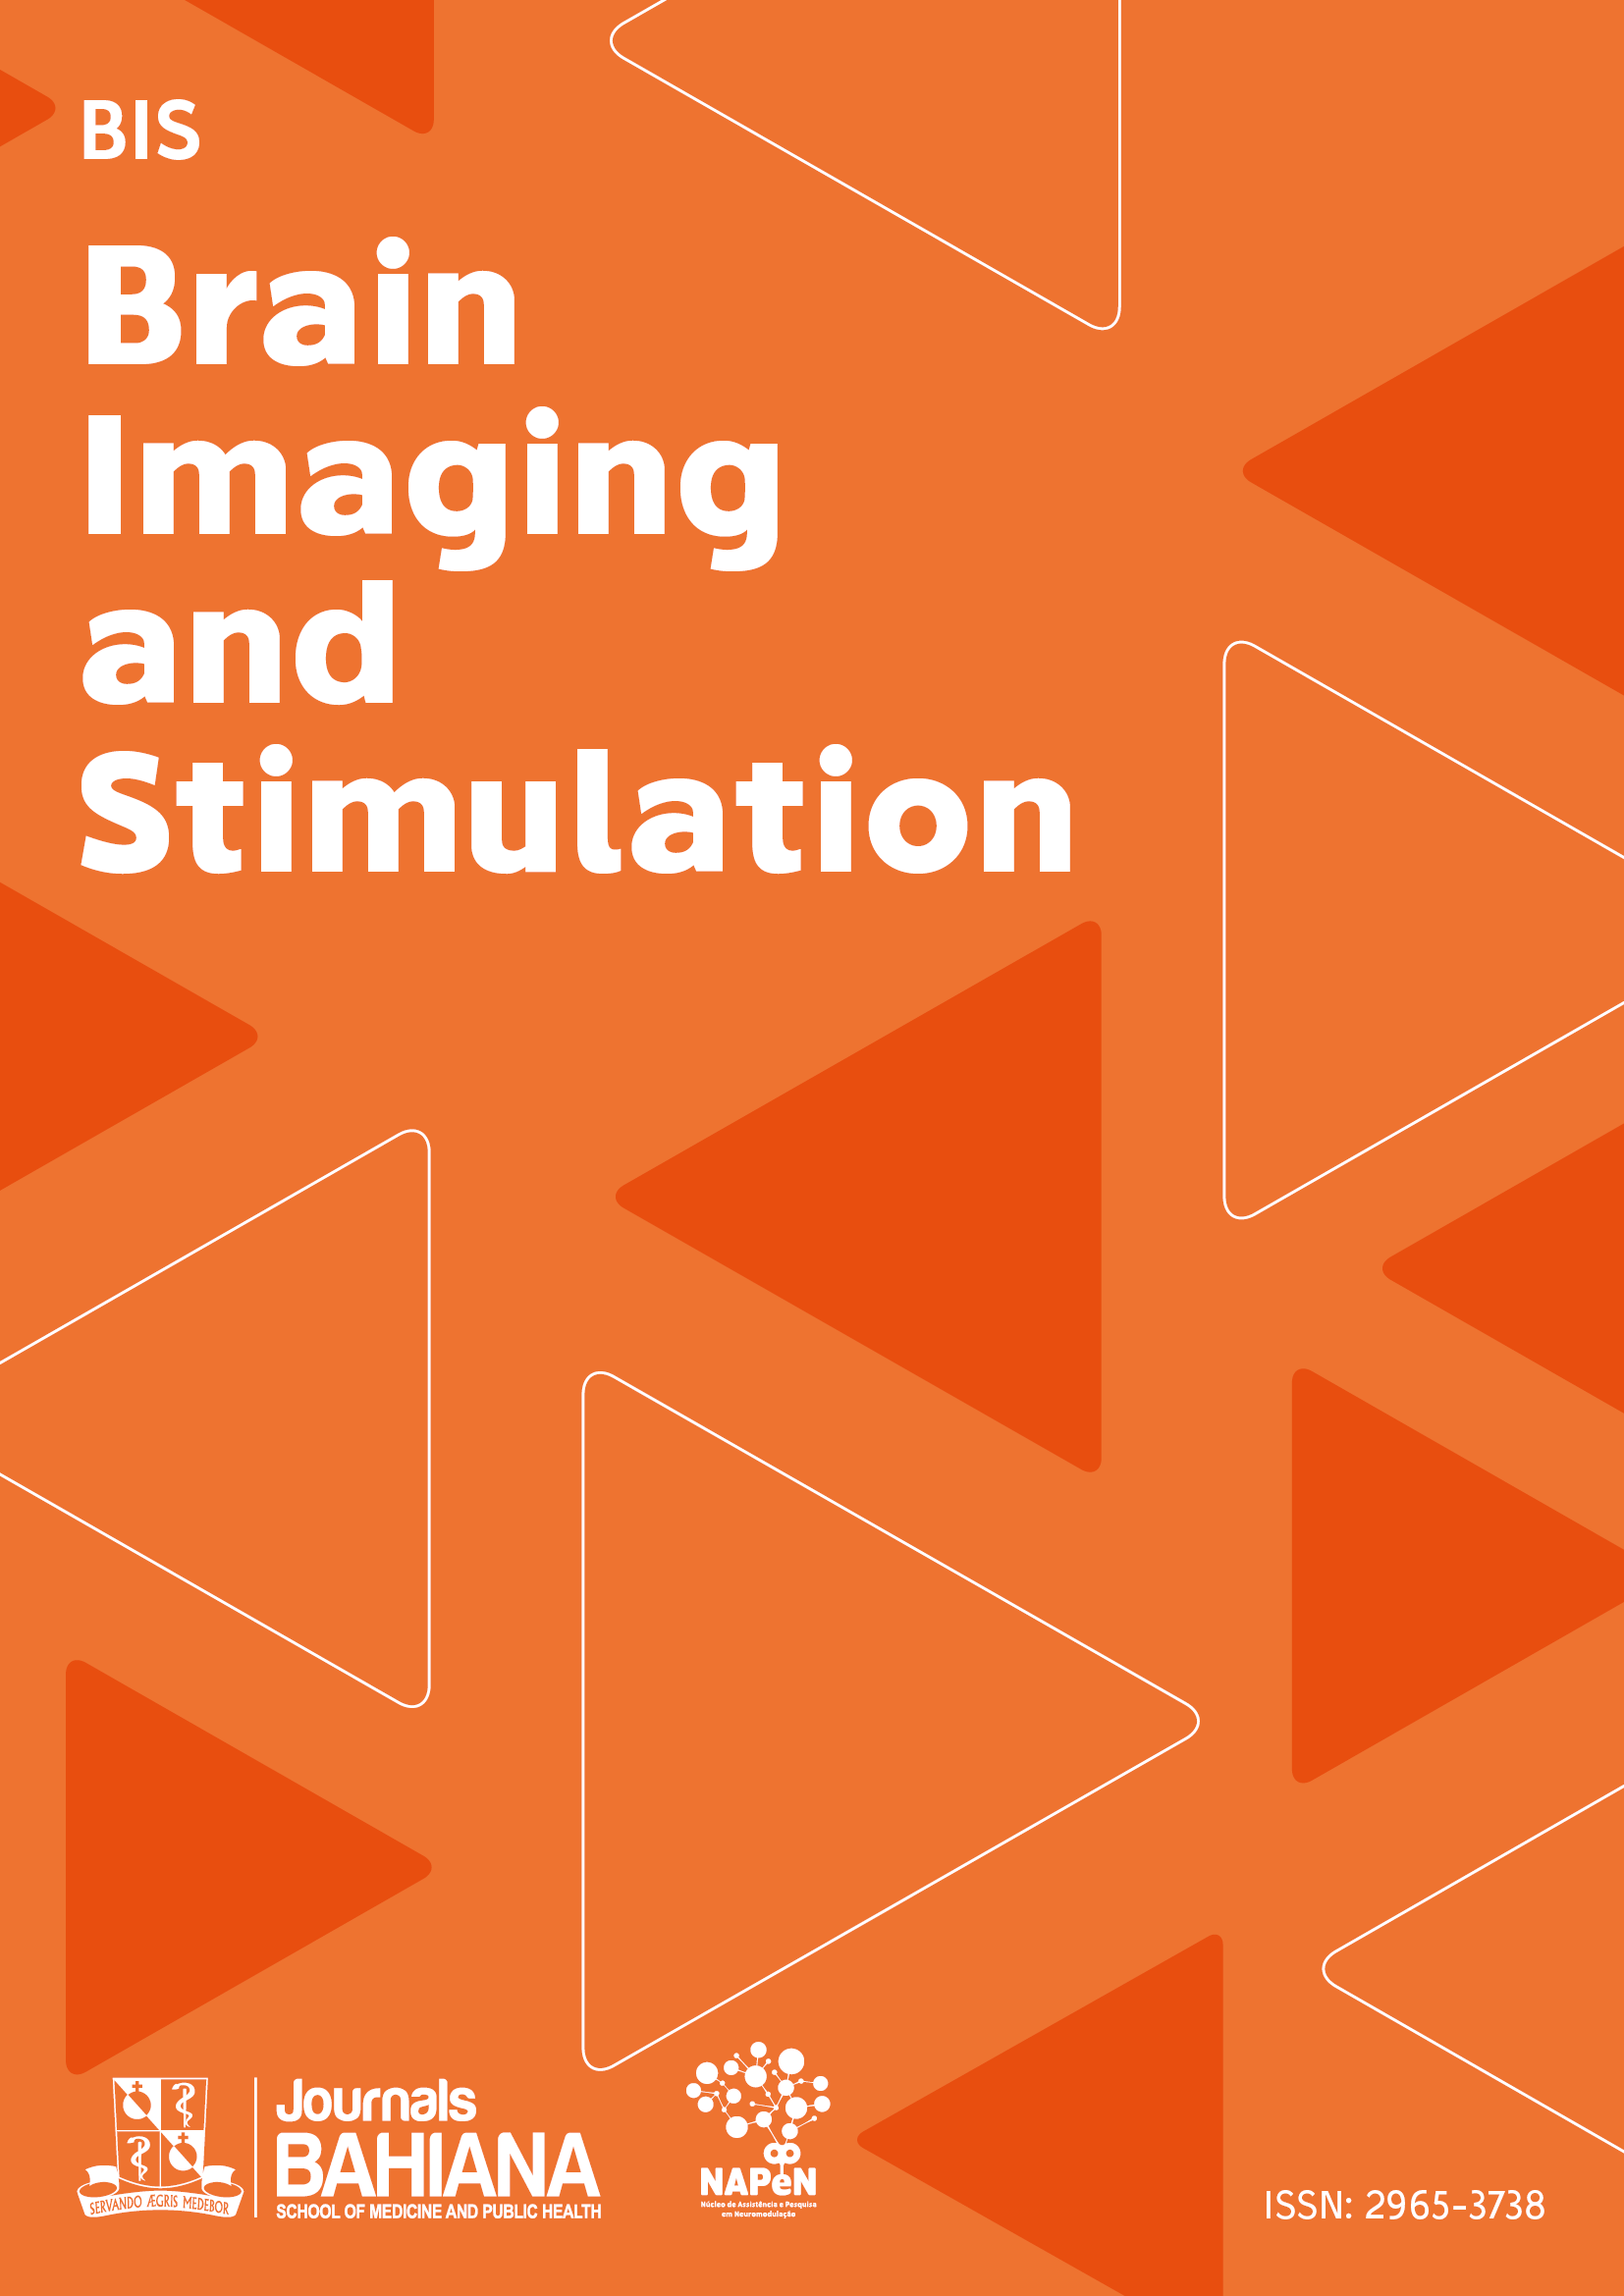 Cover thumbnail with the title of the journal, Brain Imaging and Stimulation